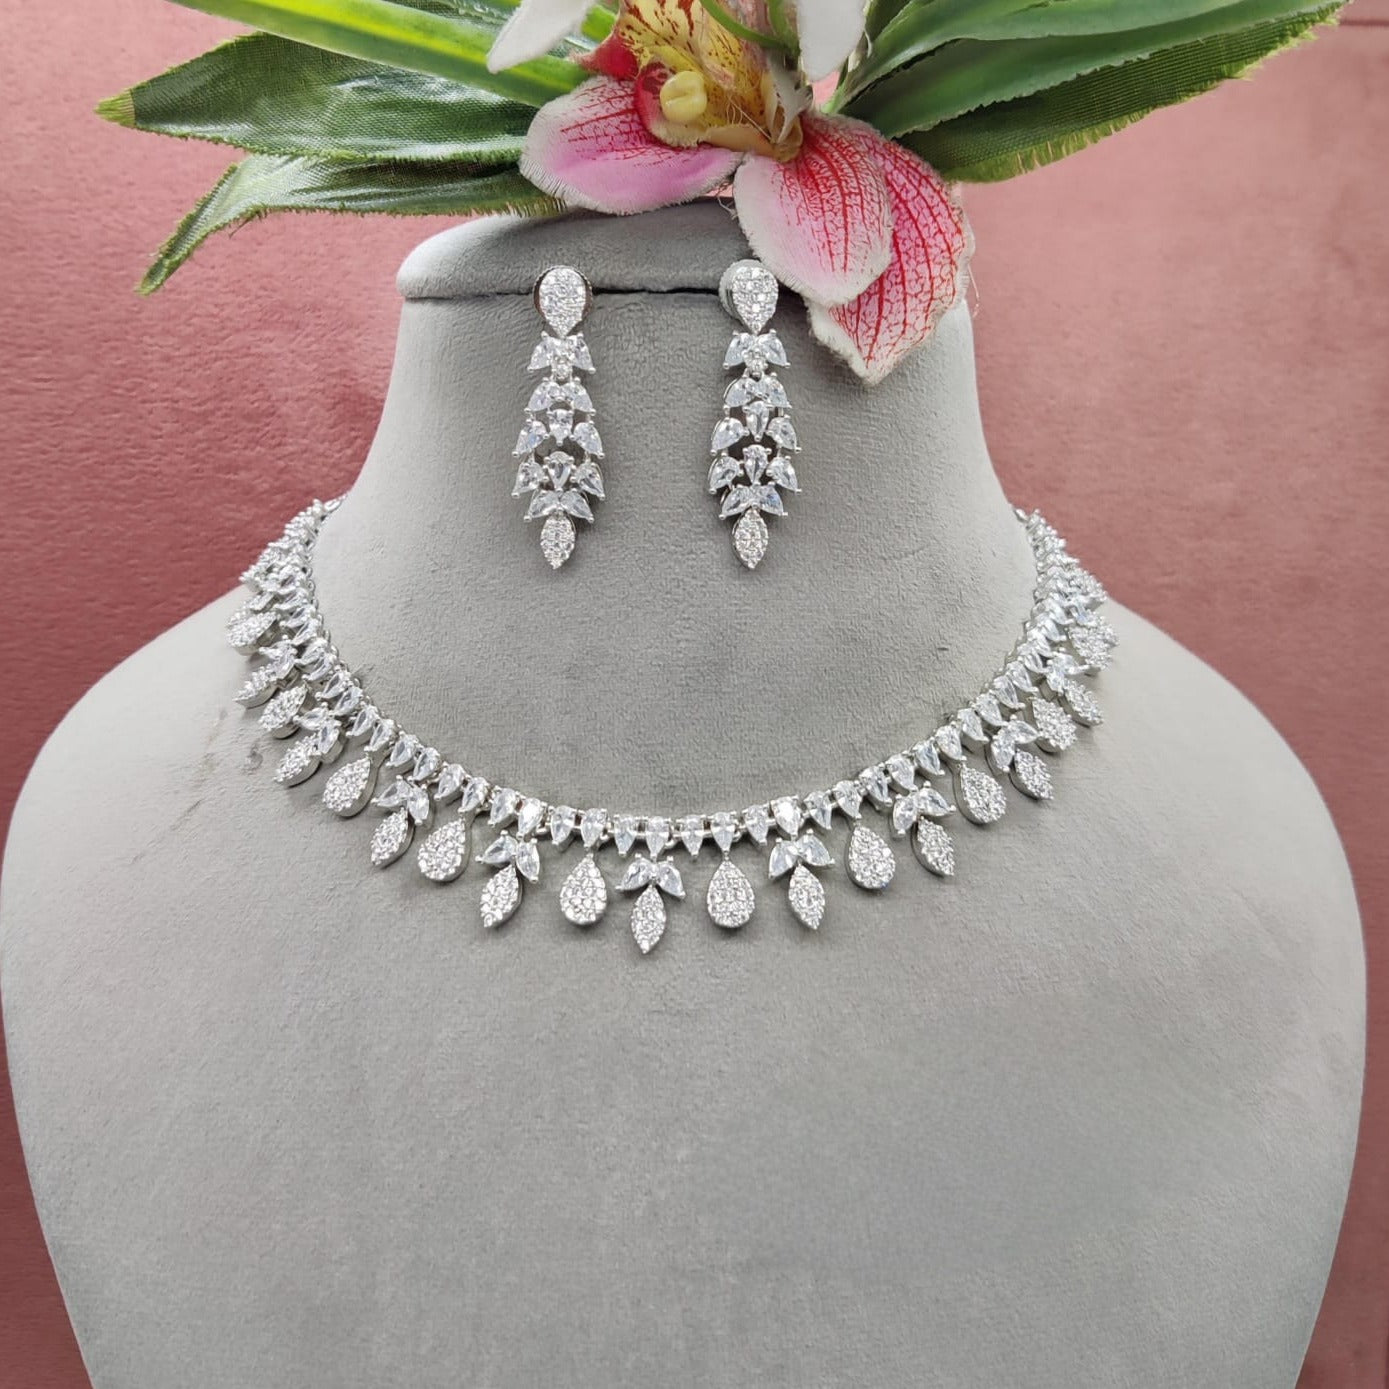 High-Quality American Diamond Necklace Set Featuring an Array of Elegant Diamond Shapes